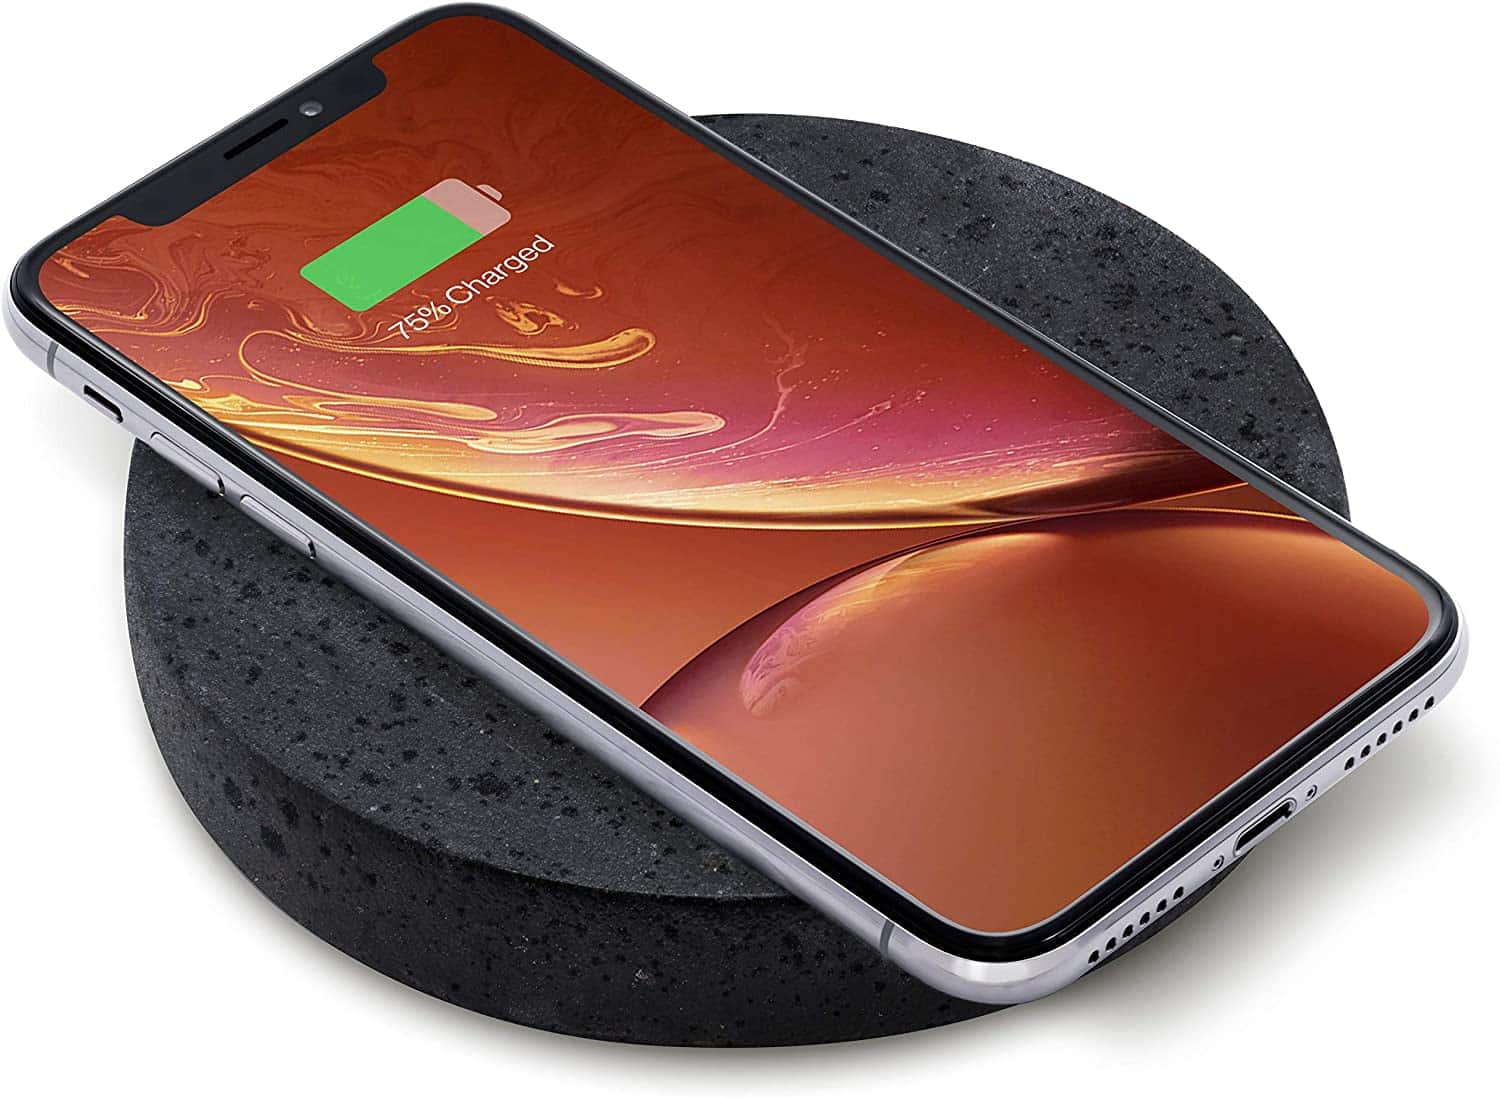 Eggtronic Wireless Charging Stone - Qi Certified 10W high Speed Charger with Built-in Durable Braided Cable for iPhone, Galaxy, Note, AirPods 2, AirPods Pro, Galaxy Buds, Pixel Buds - Lava